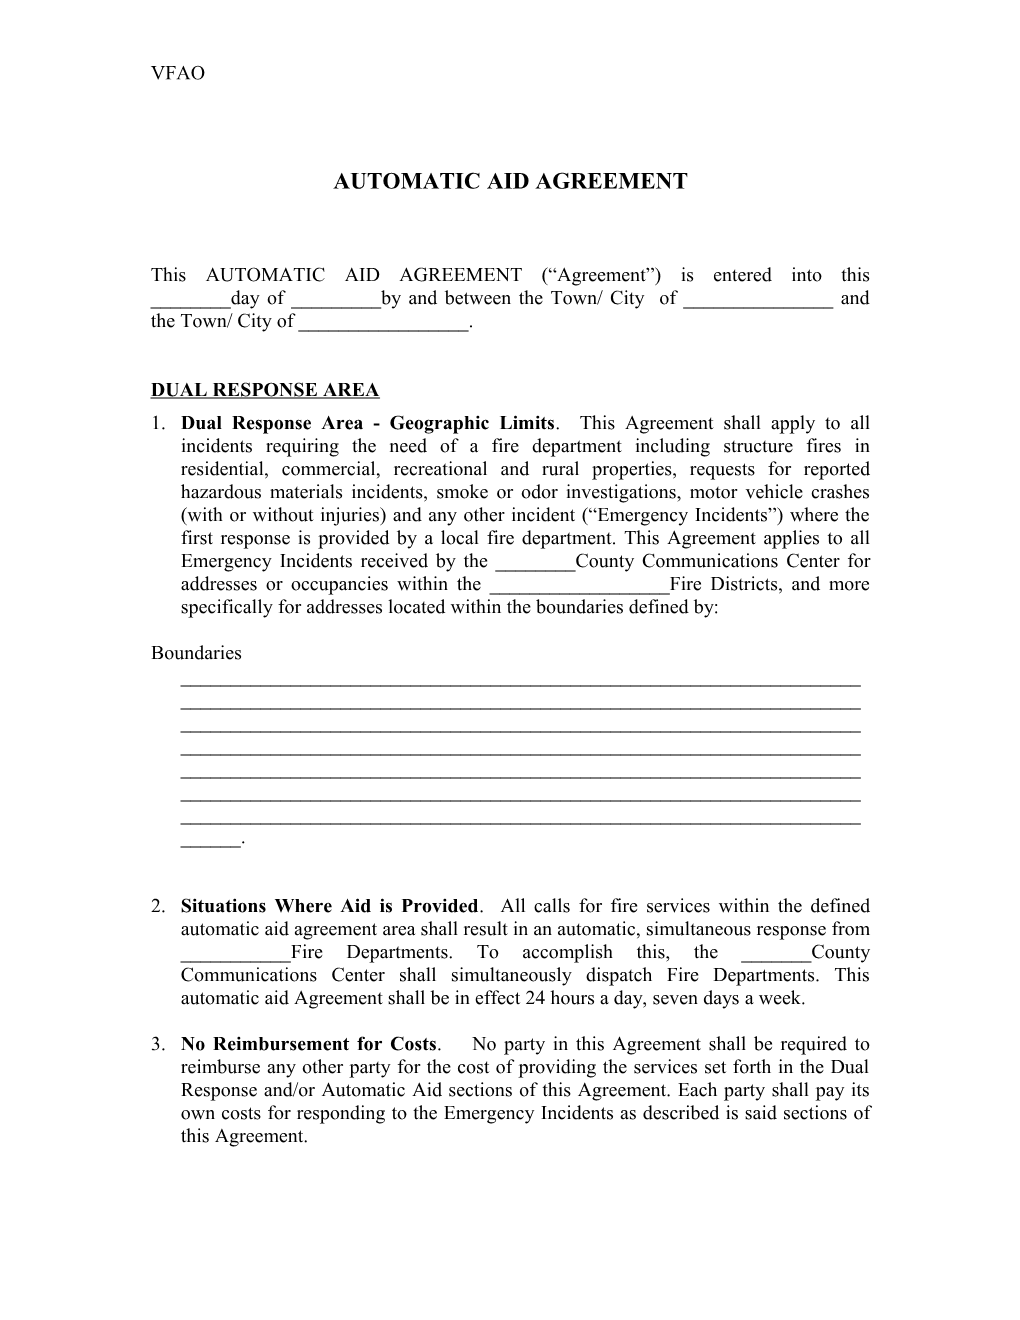 Automatic Aid Agreement